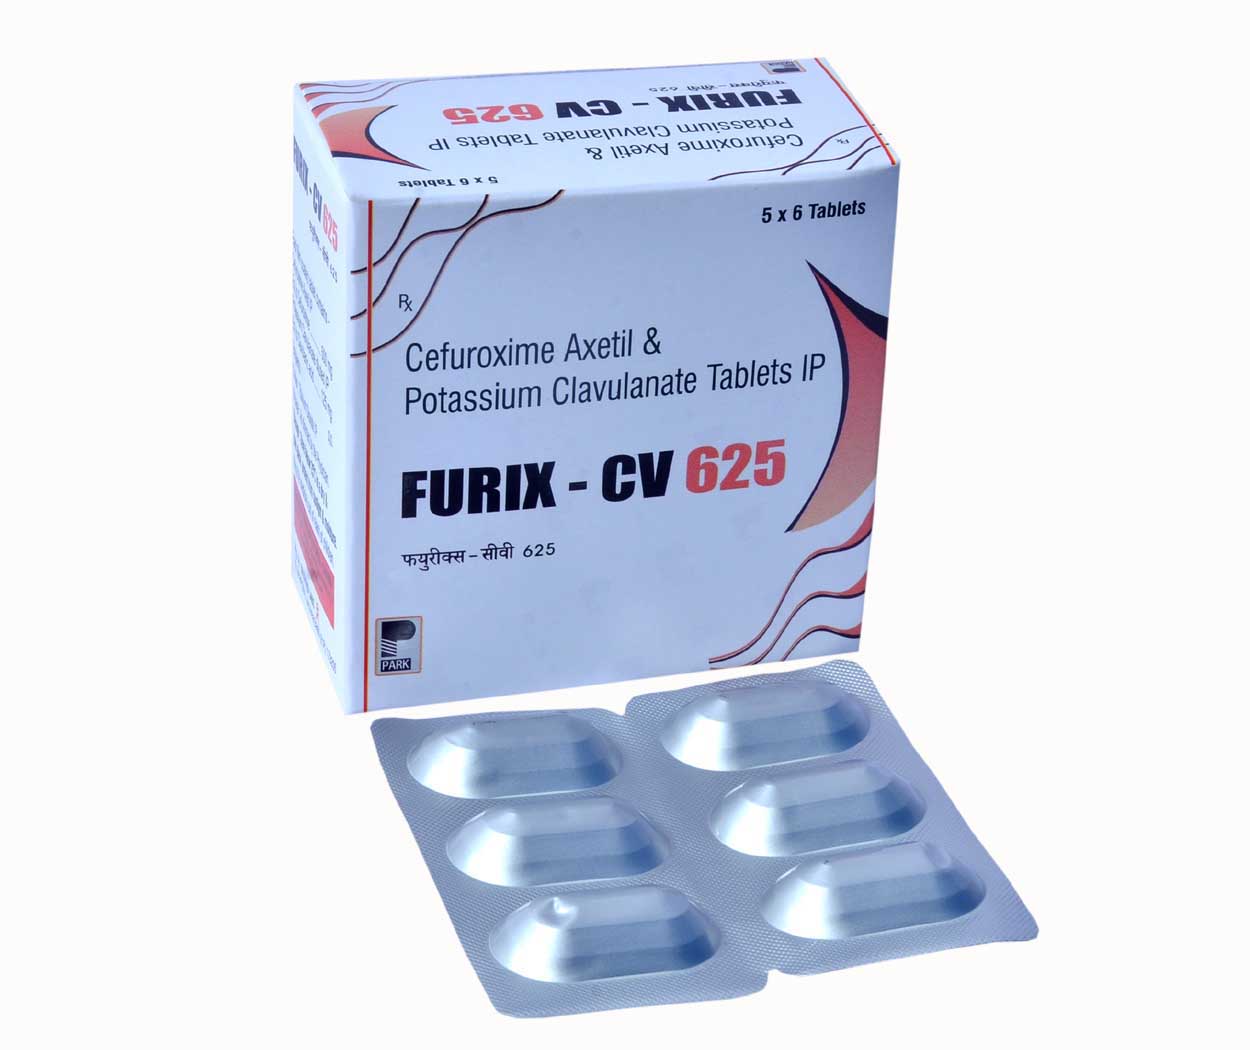 Product Name: FURIX CV 625, Compositions of FURIX CV 625 are Cefuroxime Axetil & Potassium Clavulanate Tablets IP - Park Pharmaceuticals